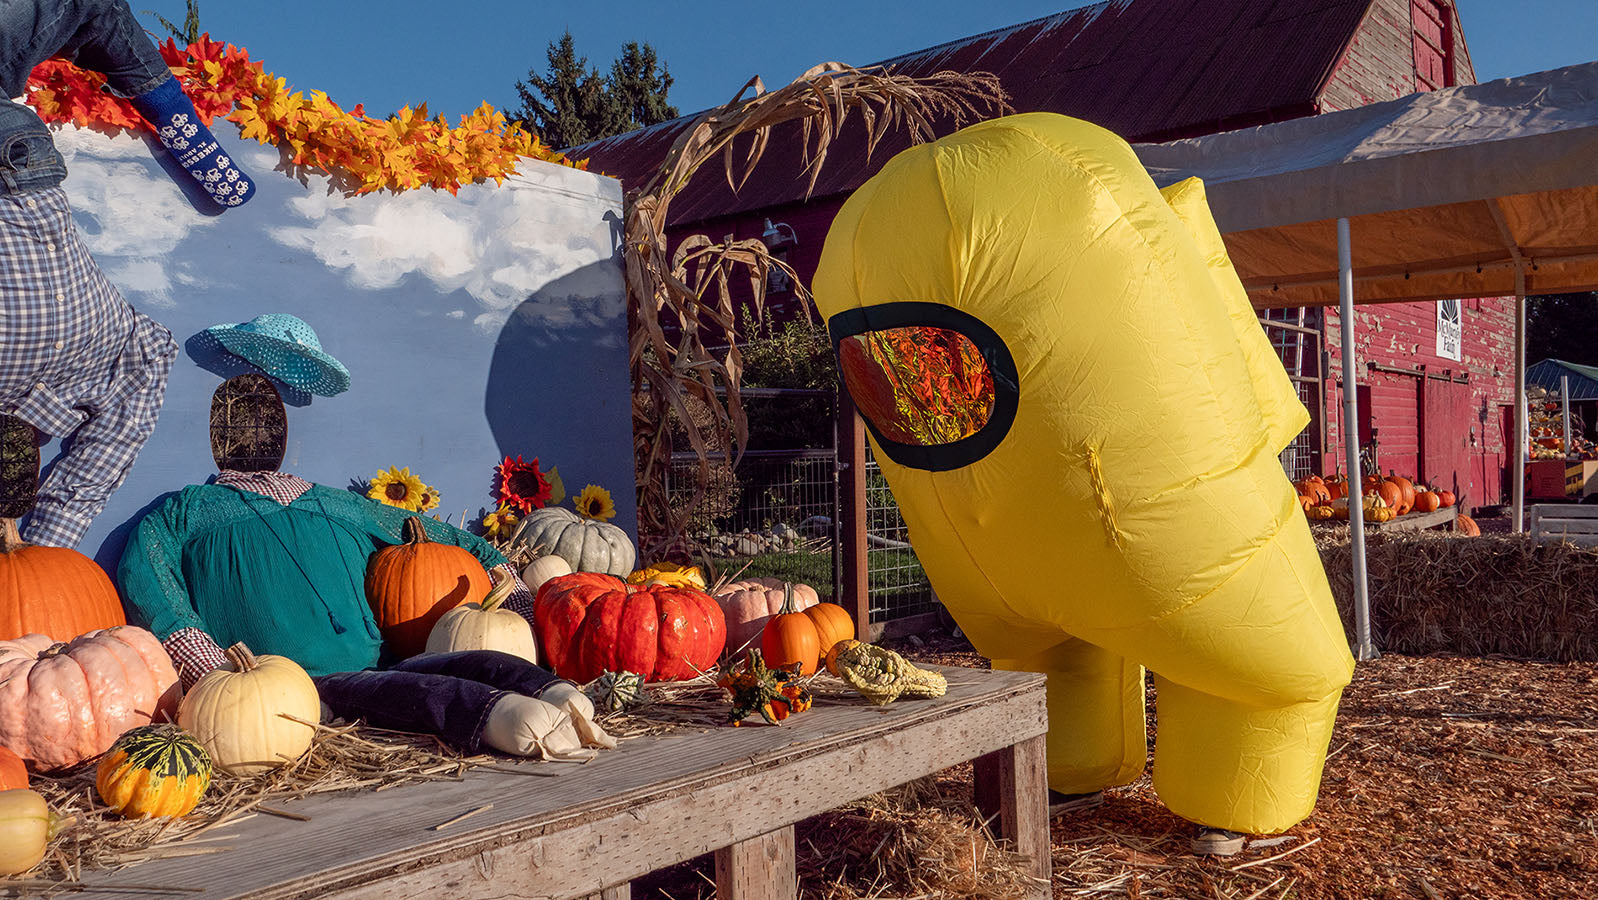 A photograph of the yellow inflatable Crewmate leaning over a table looking at an arrangement of seasonal gourds and pumpkins.